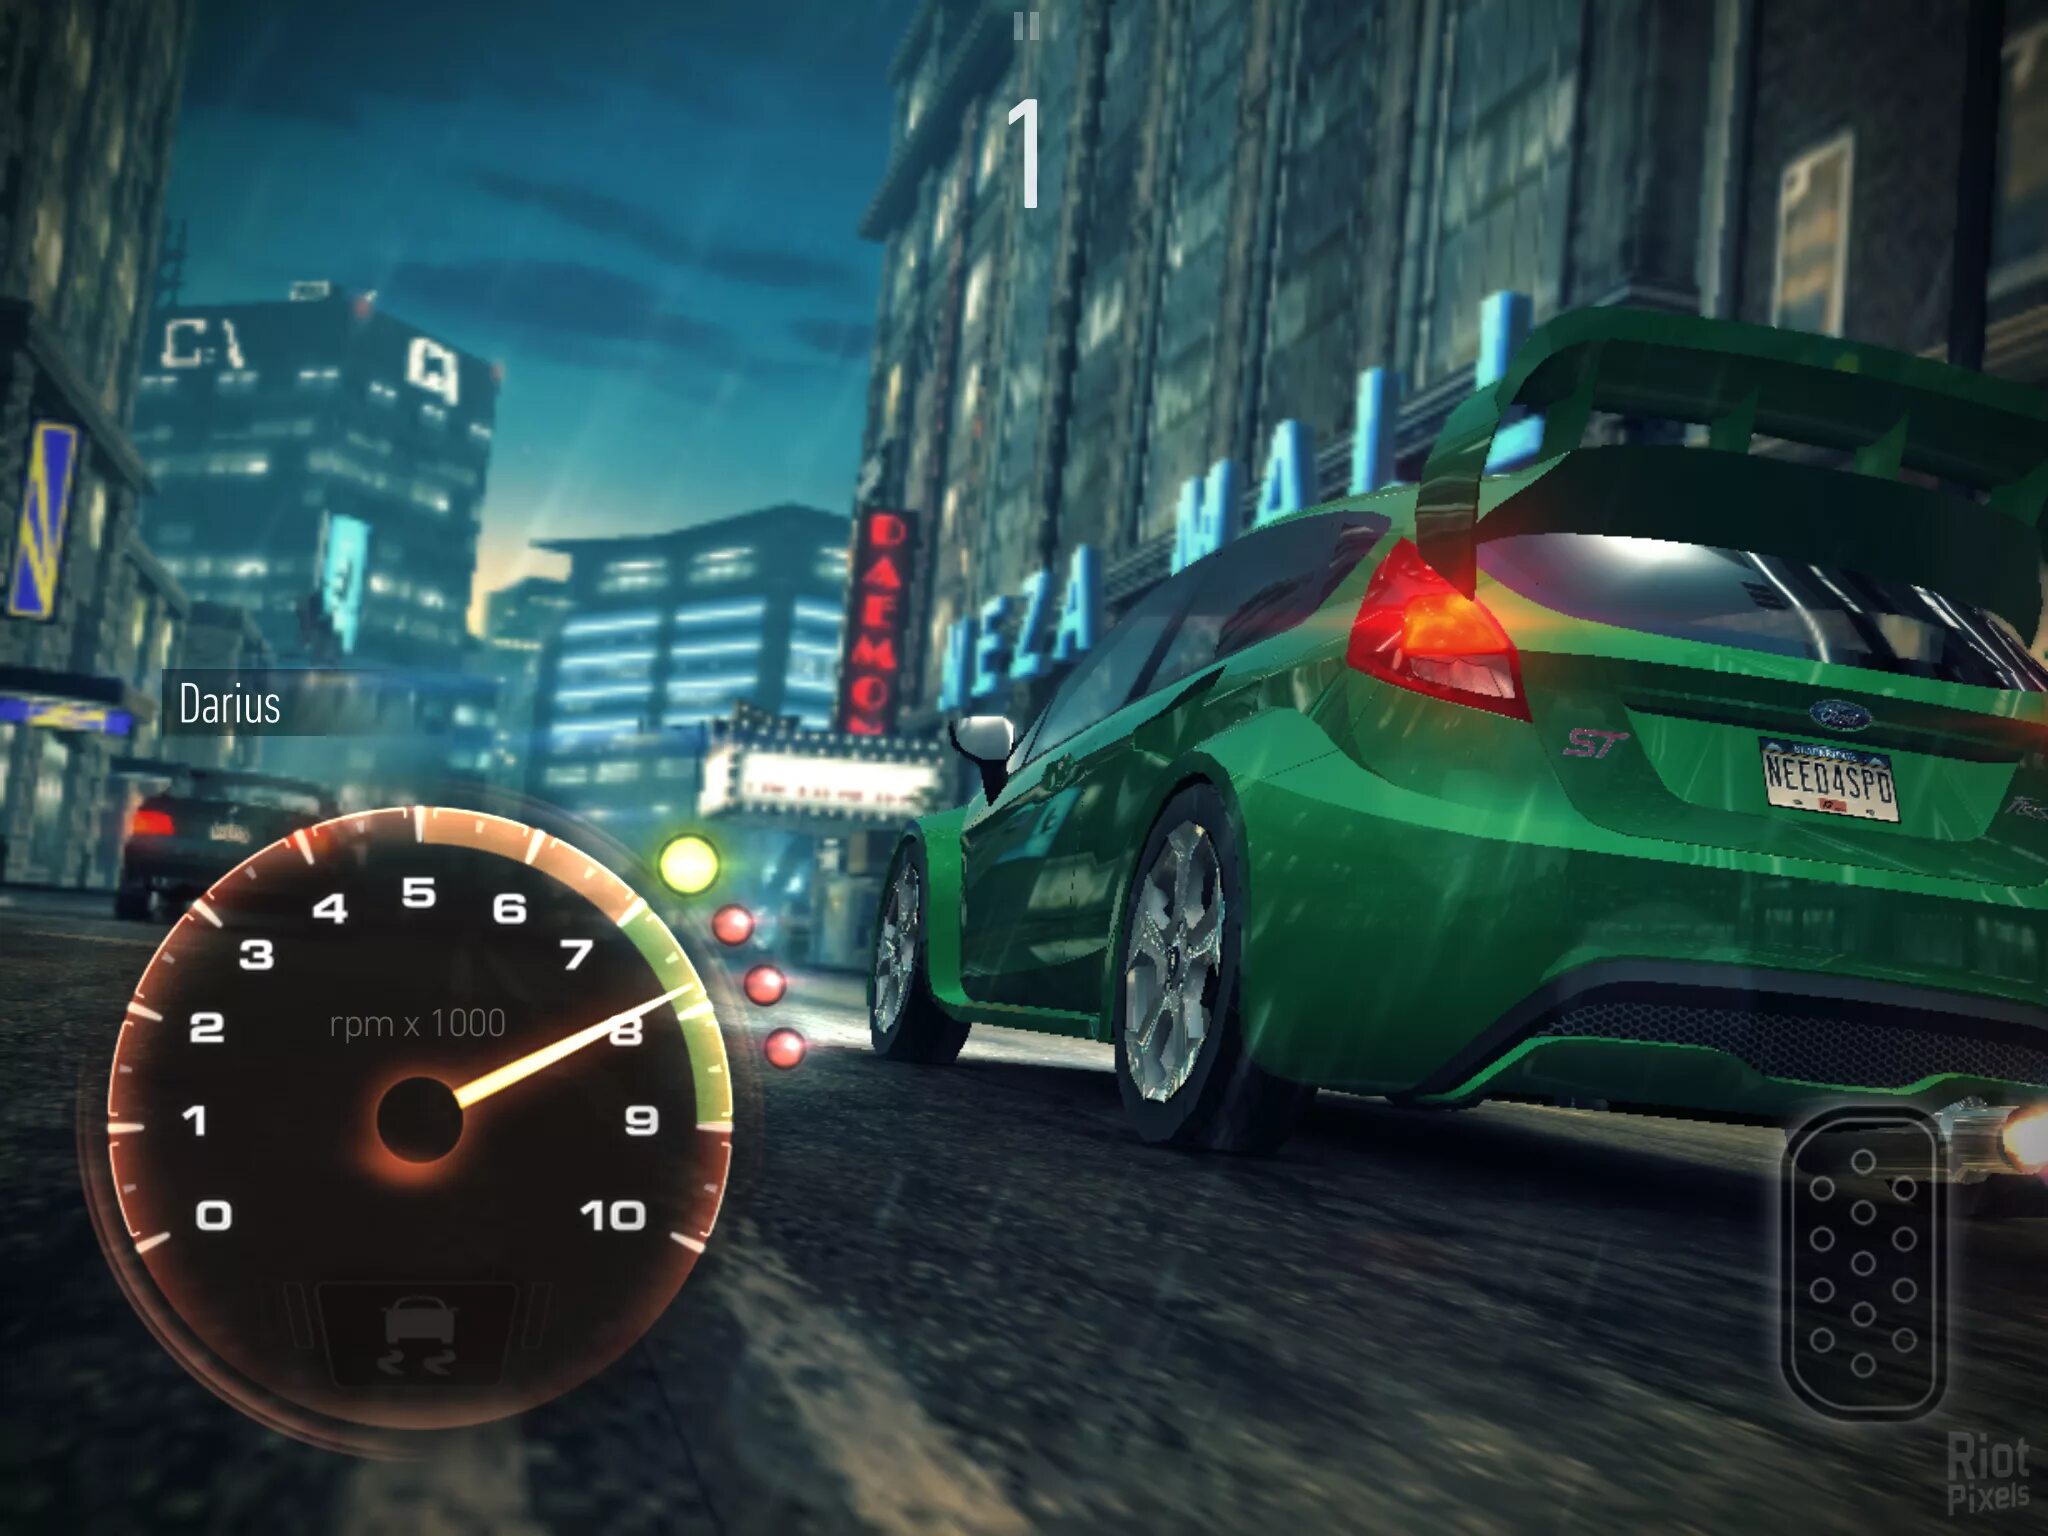 Новая игра need for speed. Need for Speed no limits. Игра NFS no limits. Need for Speed nl гонки. Нфс no limits.